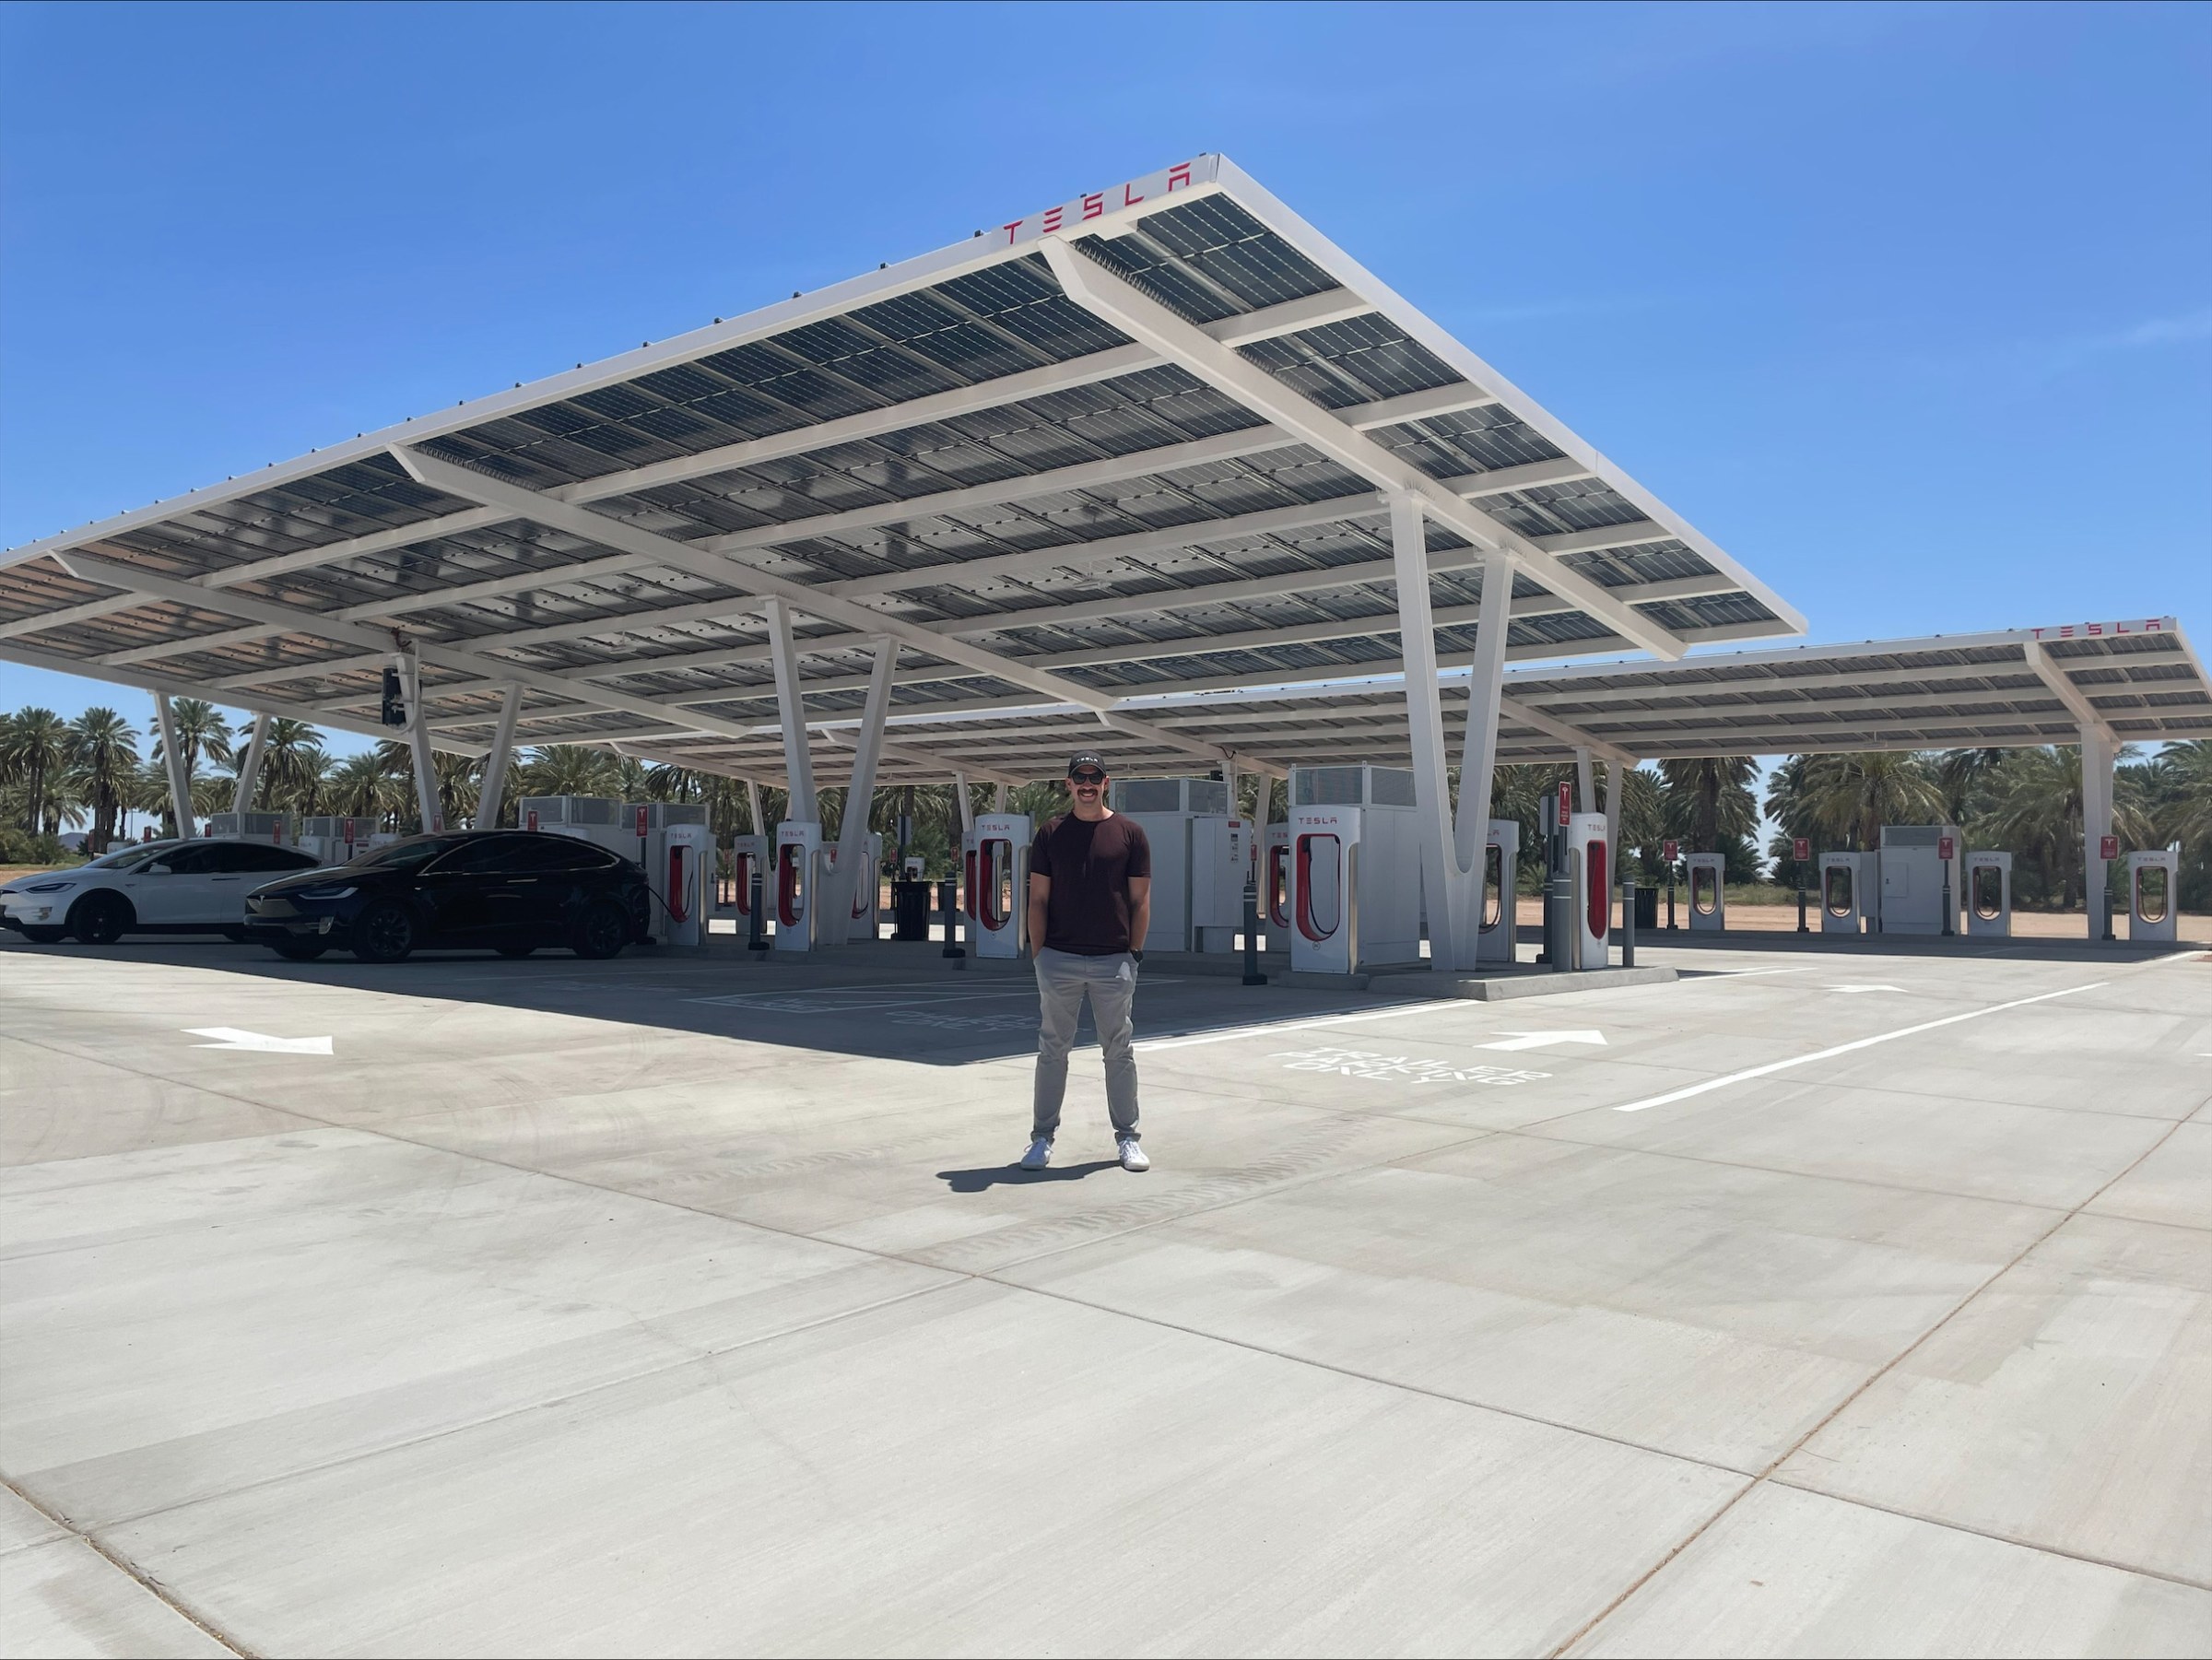 Man standing in front of an outdoor Tesla charging station with canopies overhead used for solar panels.